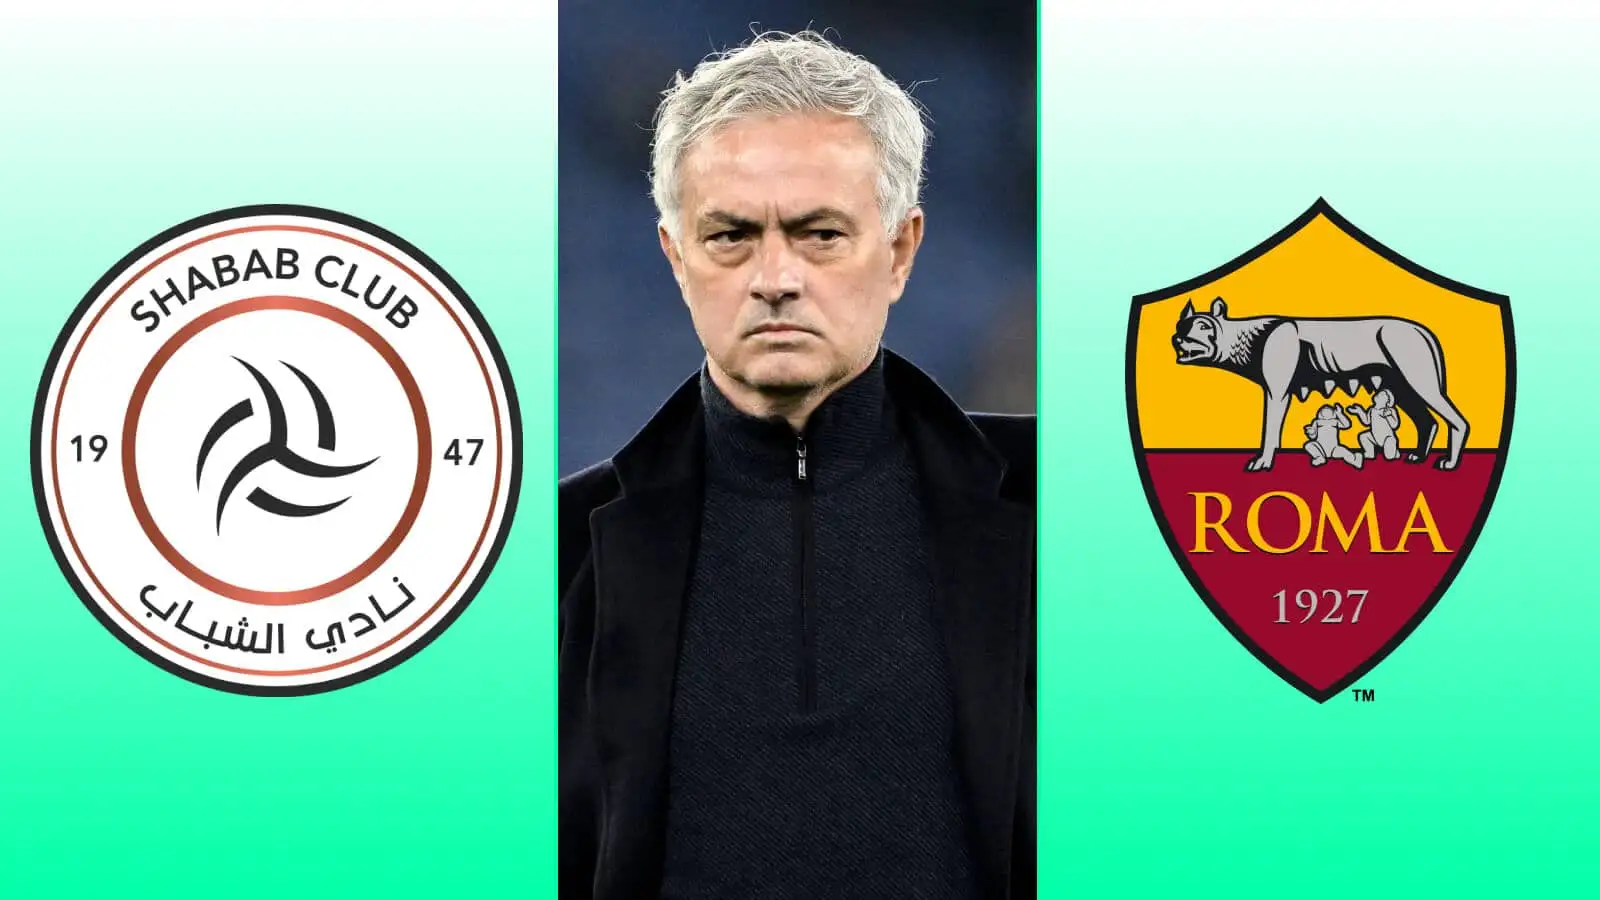 Jose Mourinho between the Al-Shabab and AS Roma badges